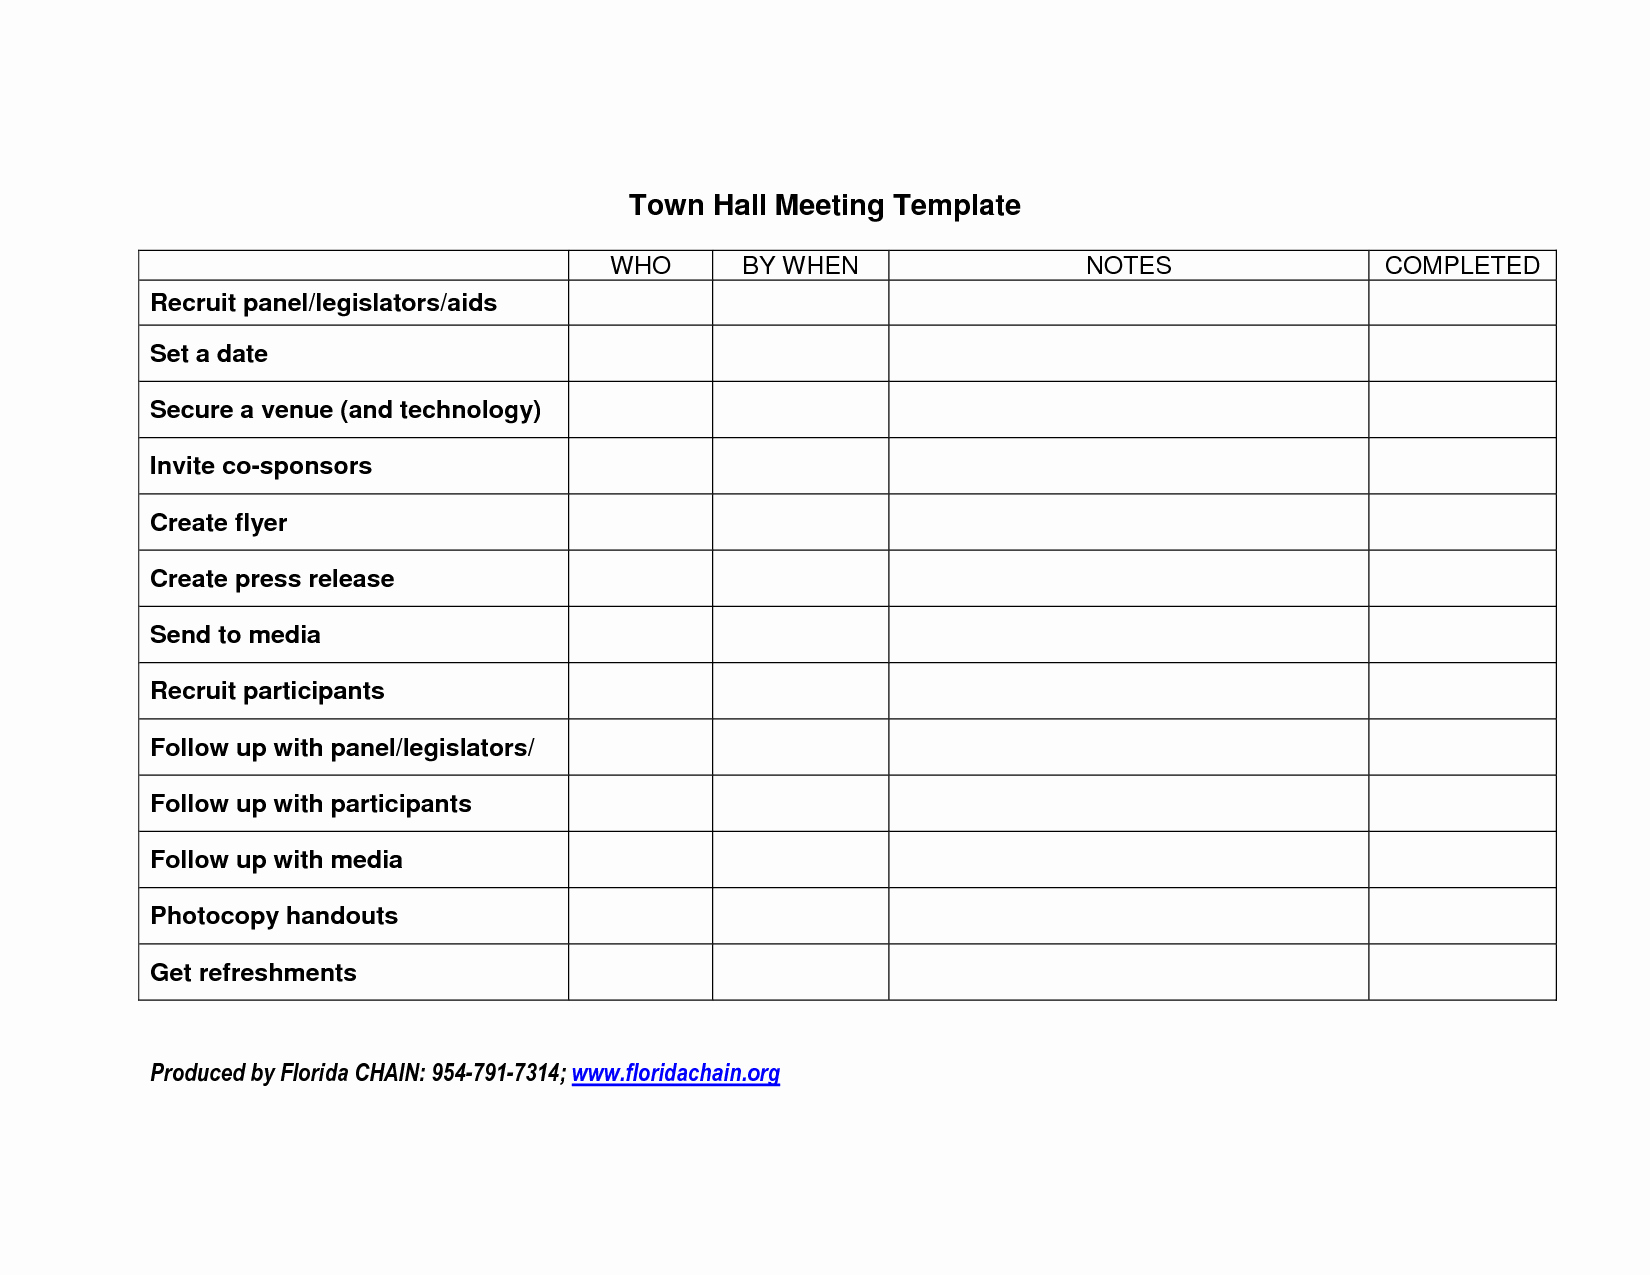 Town Hall Meeting Agenda Template Unique town Hall Meeting Agenda Template Baskanai